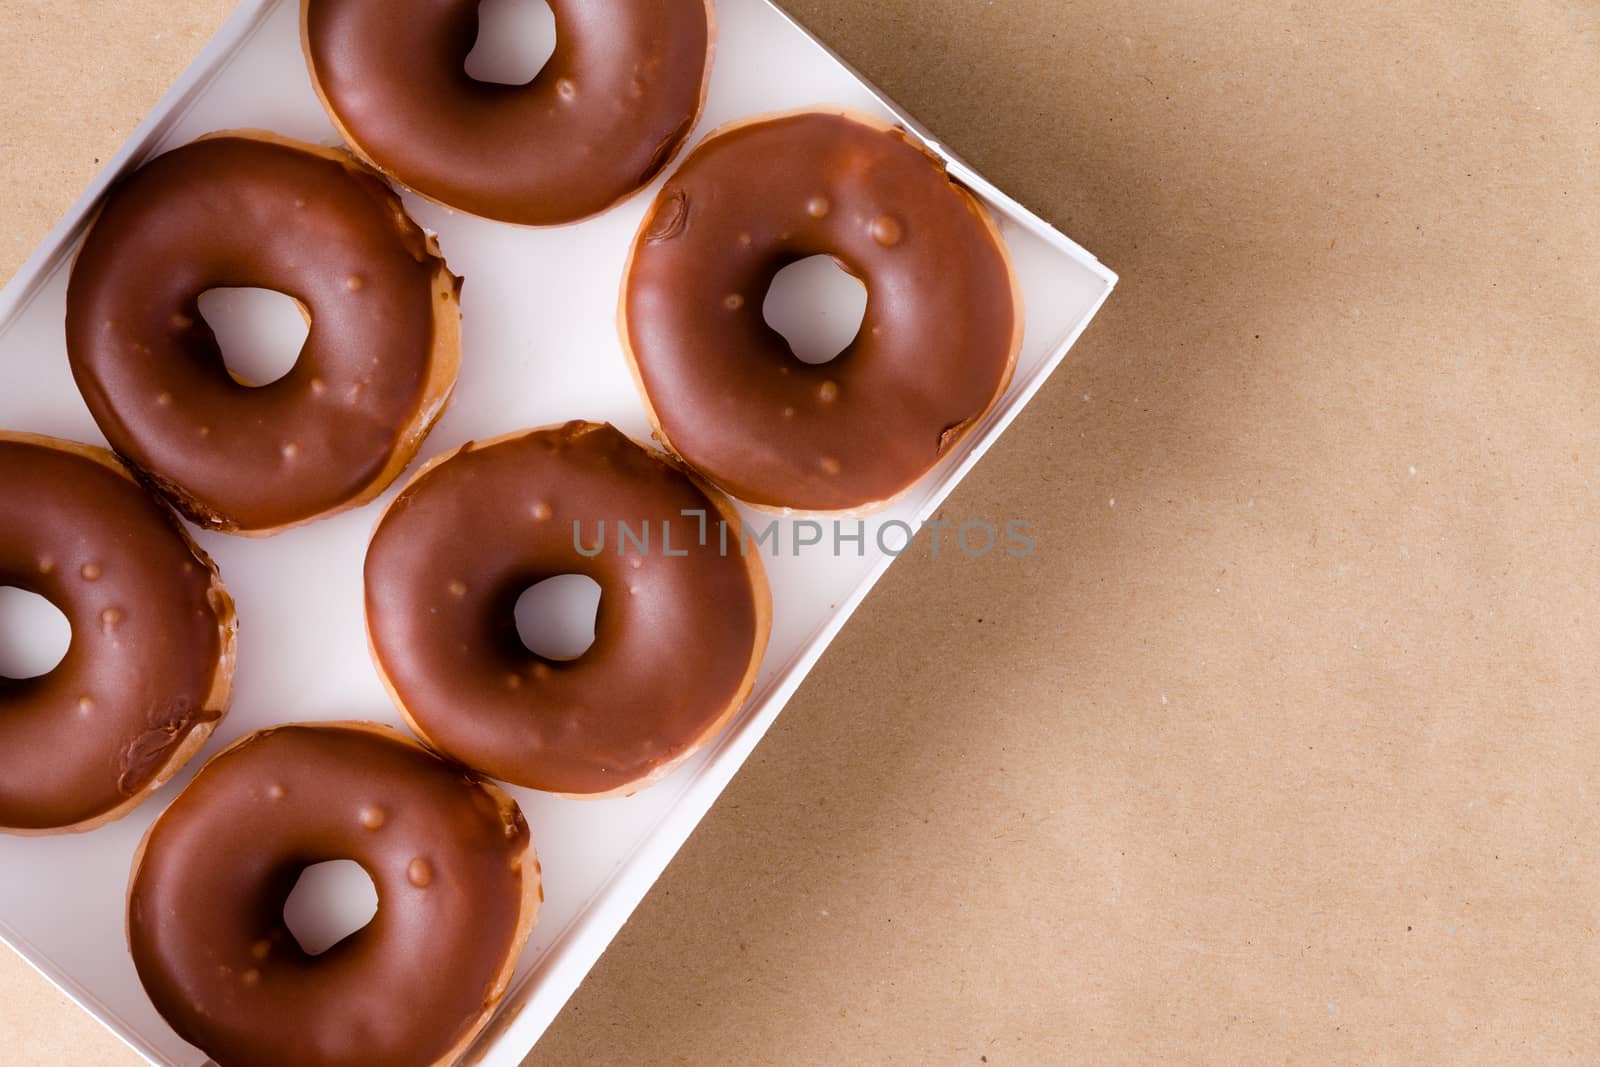 Top down view of chocolate and cream donuts in box by coskun